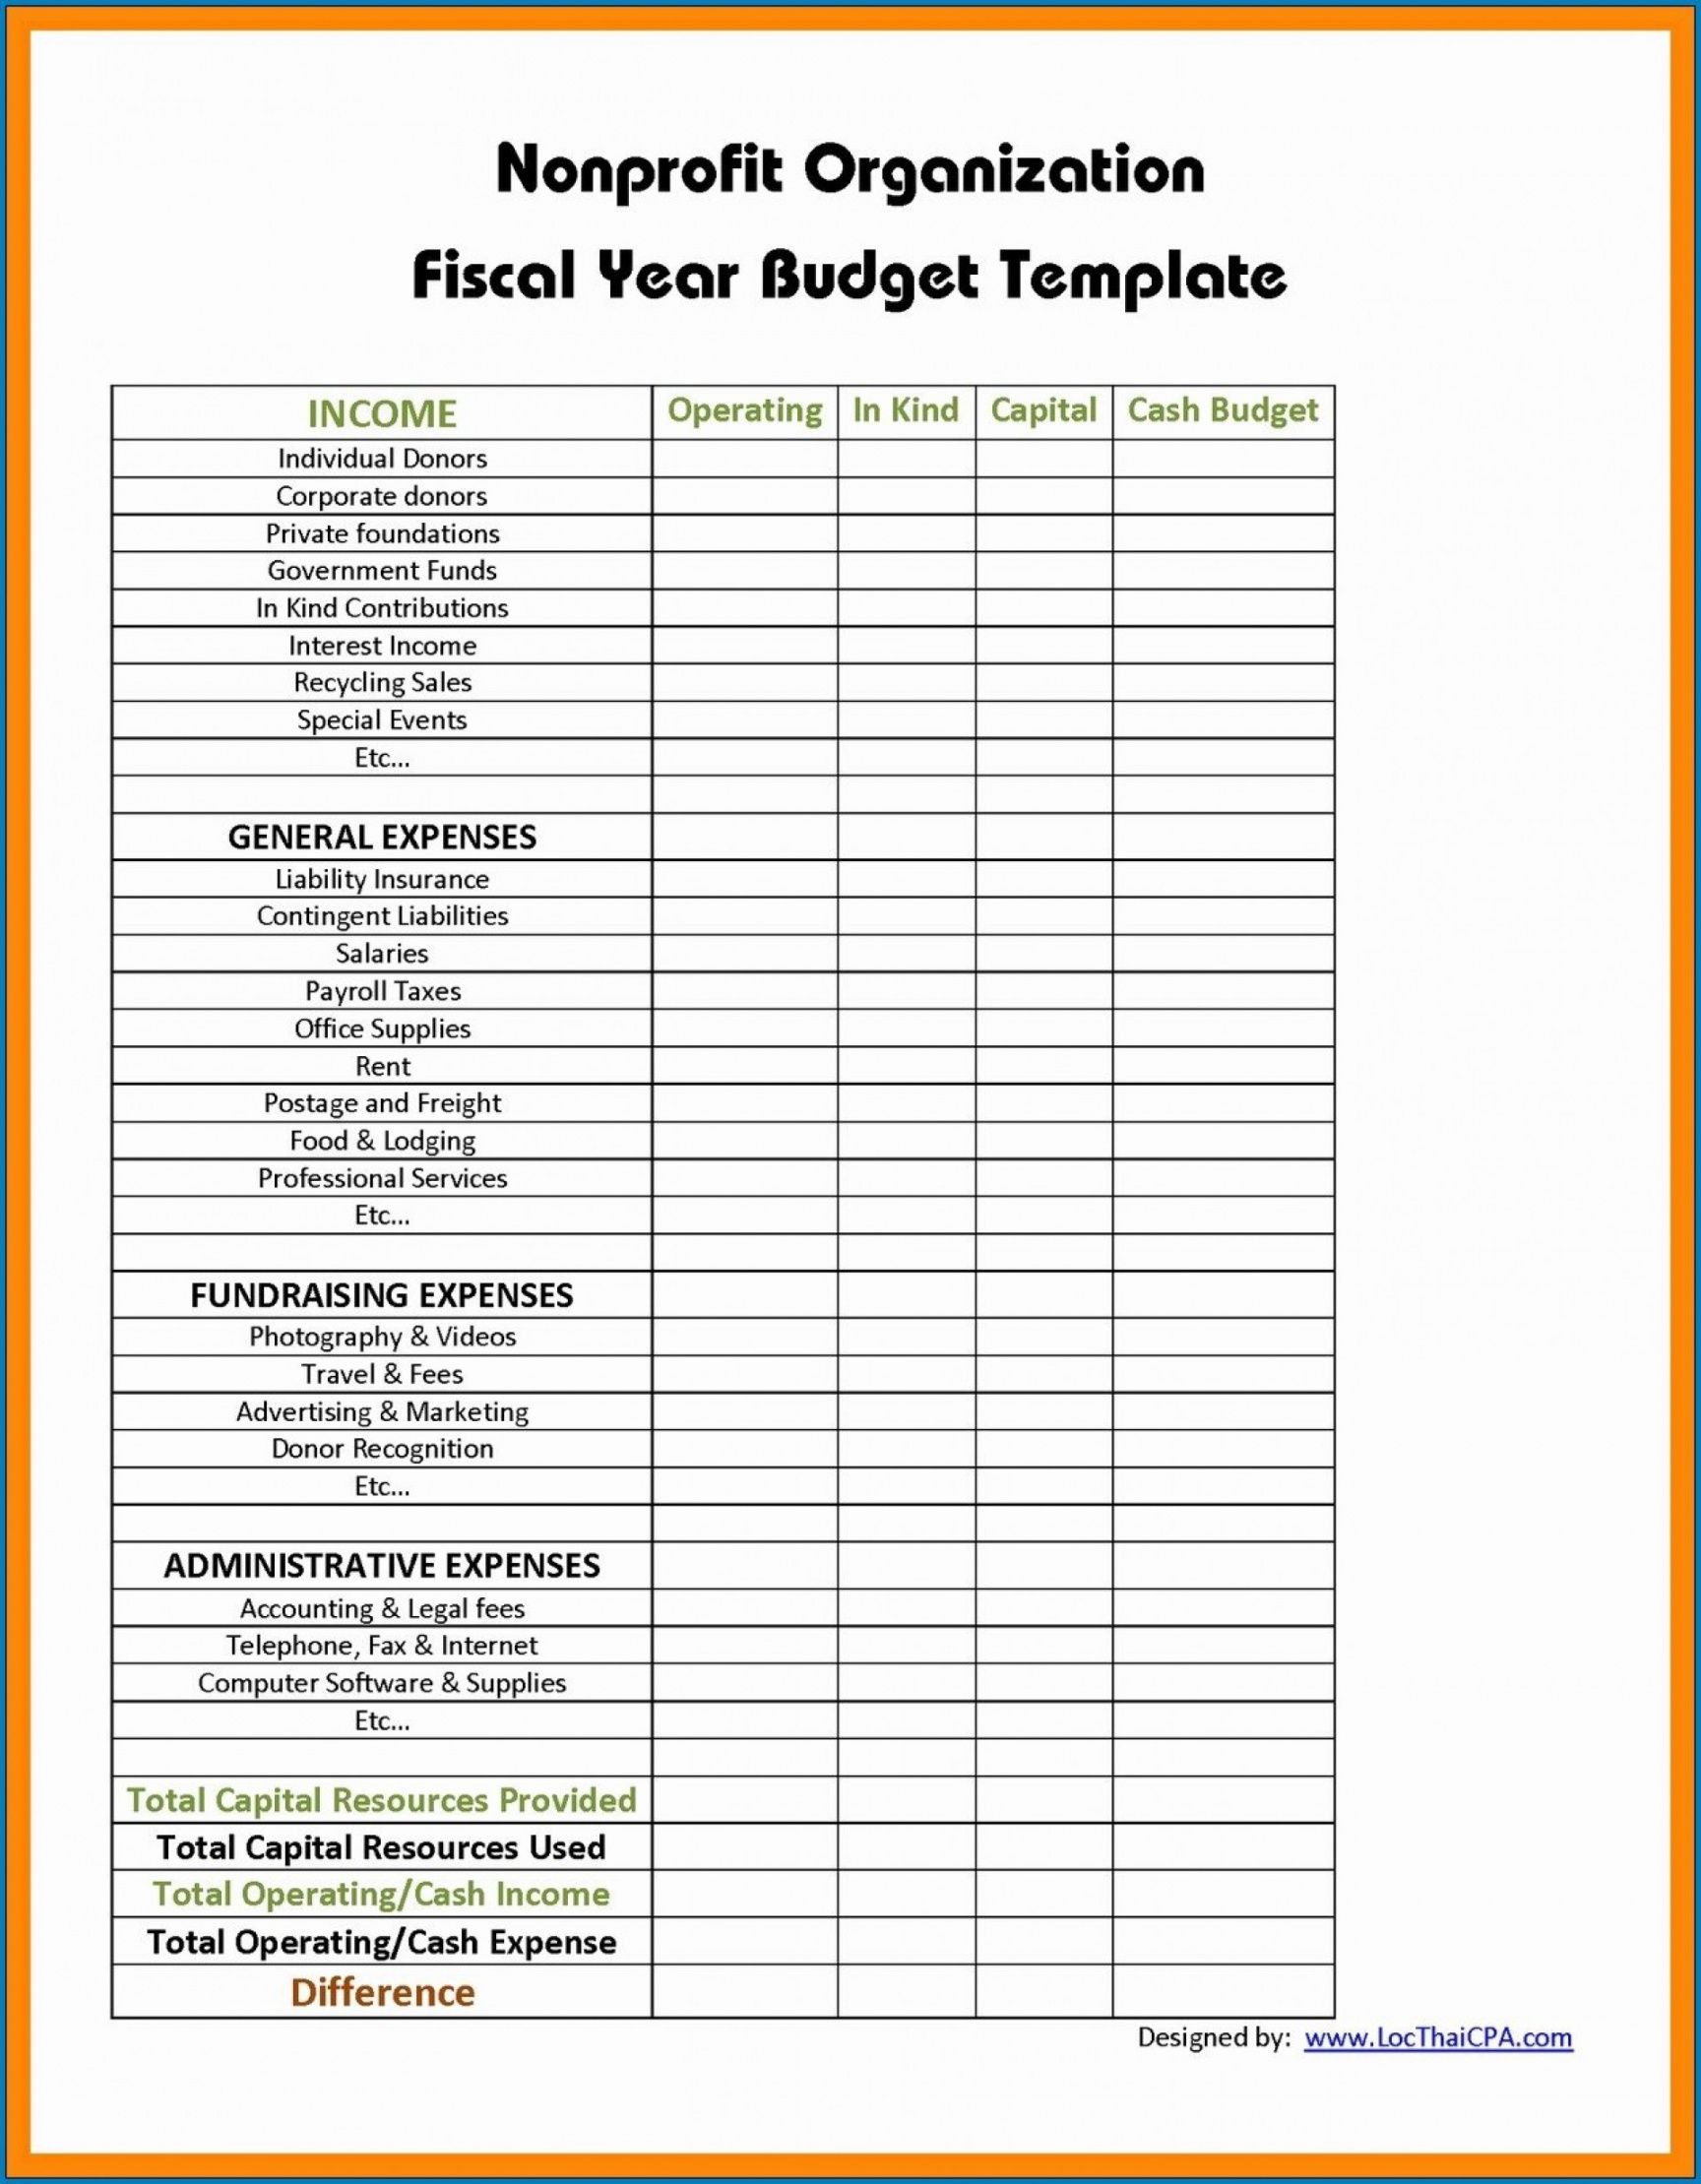 printable non profit budget template ~ addictionary nonprofit fundraising budget template excel